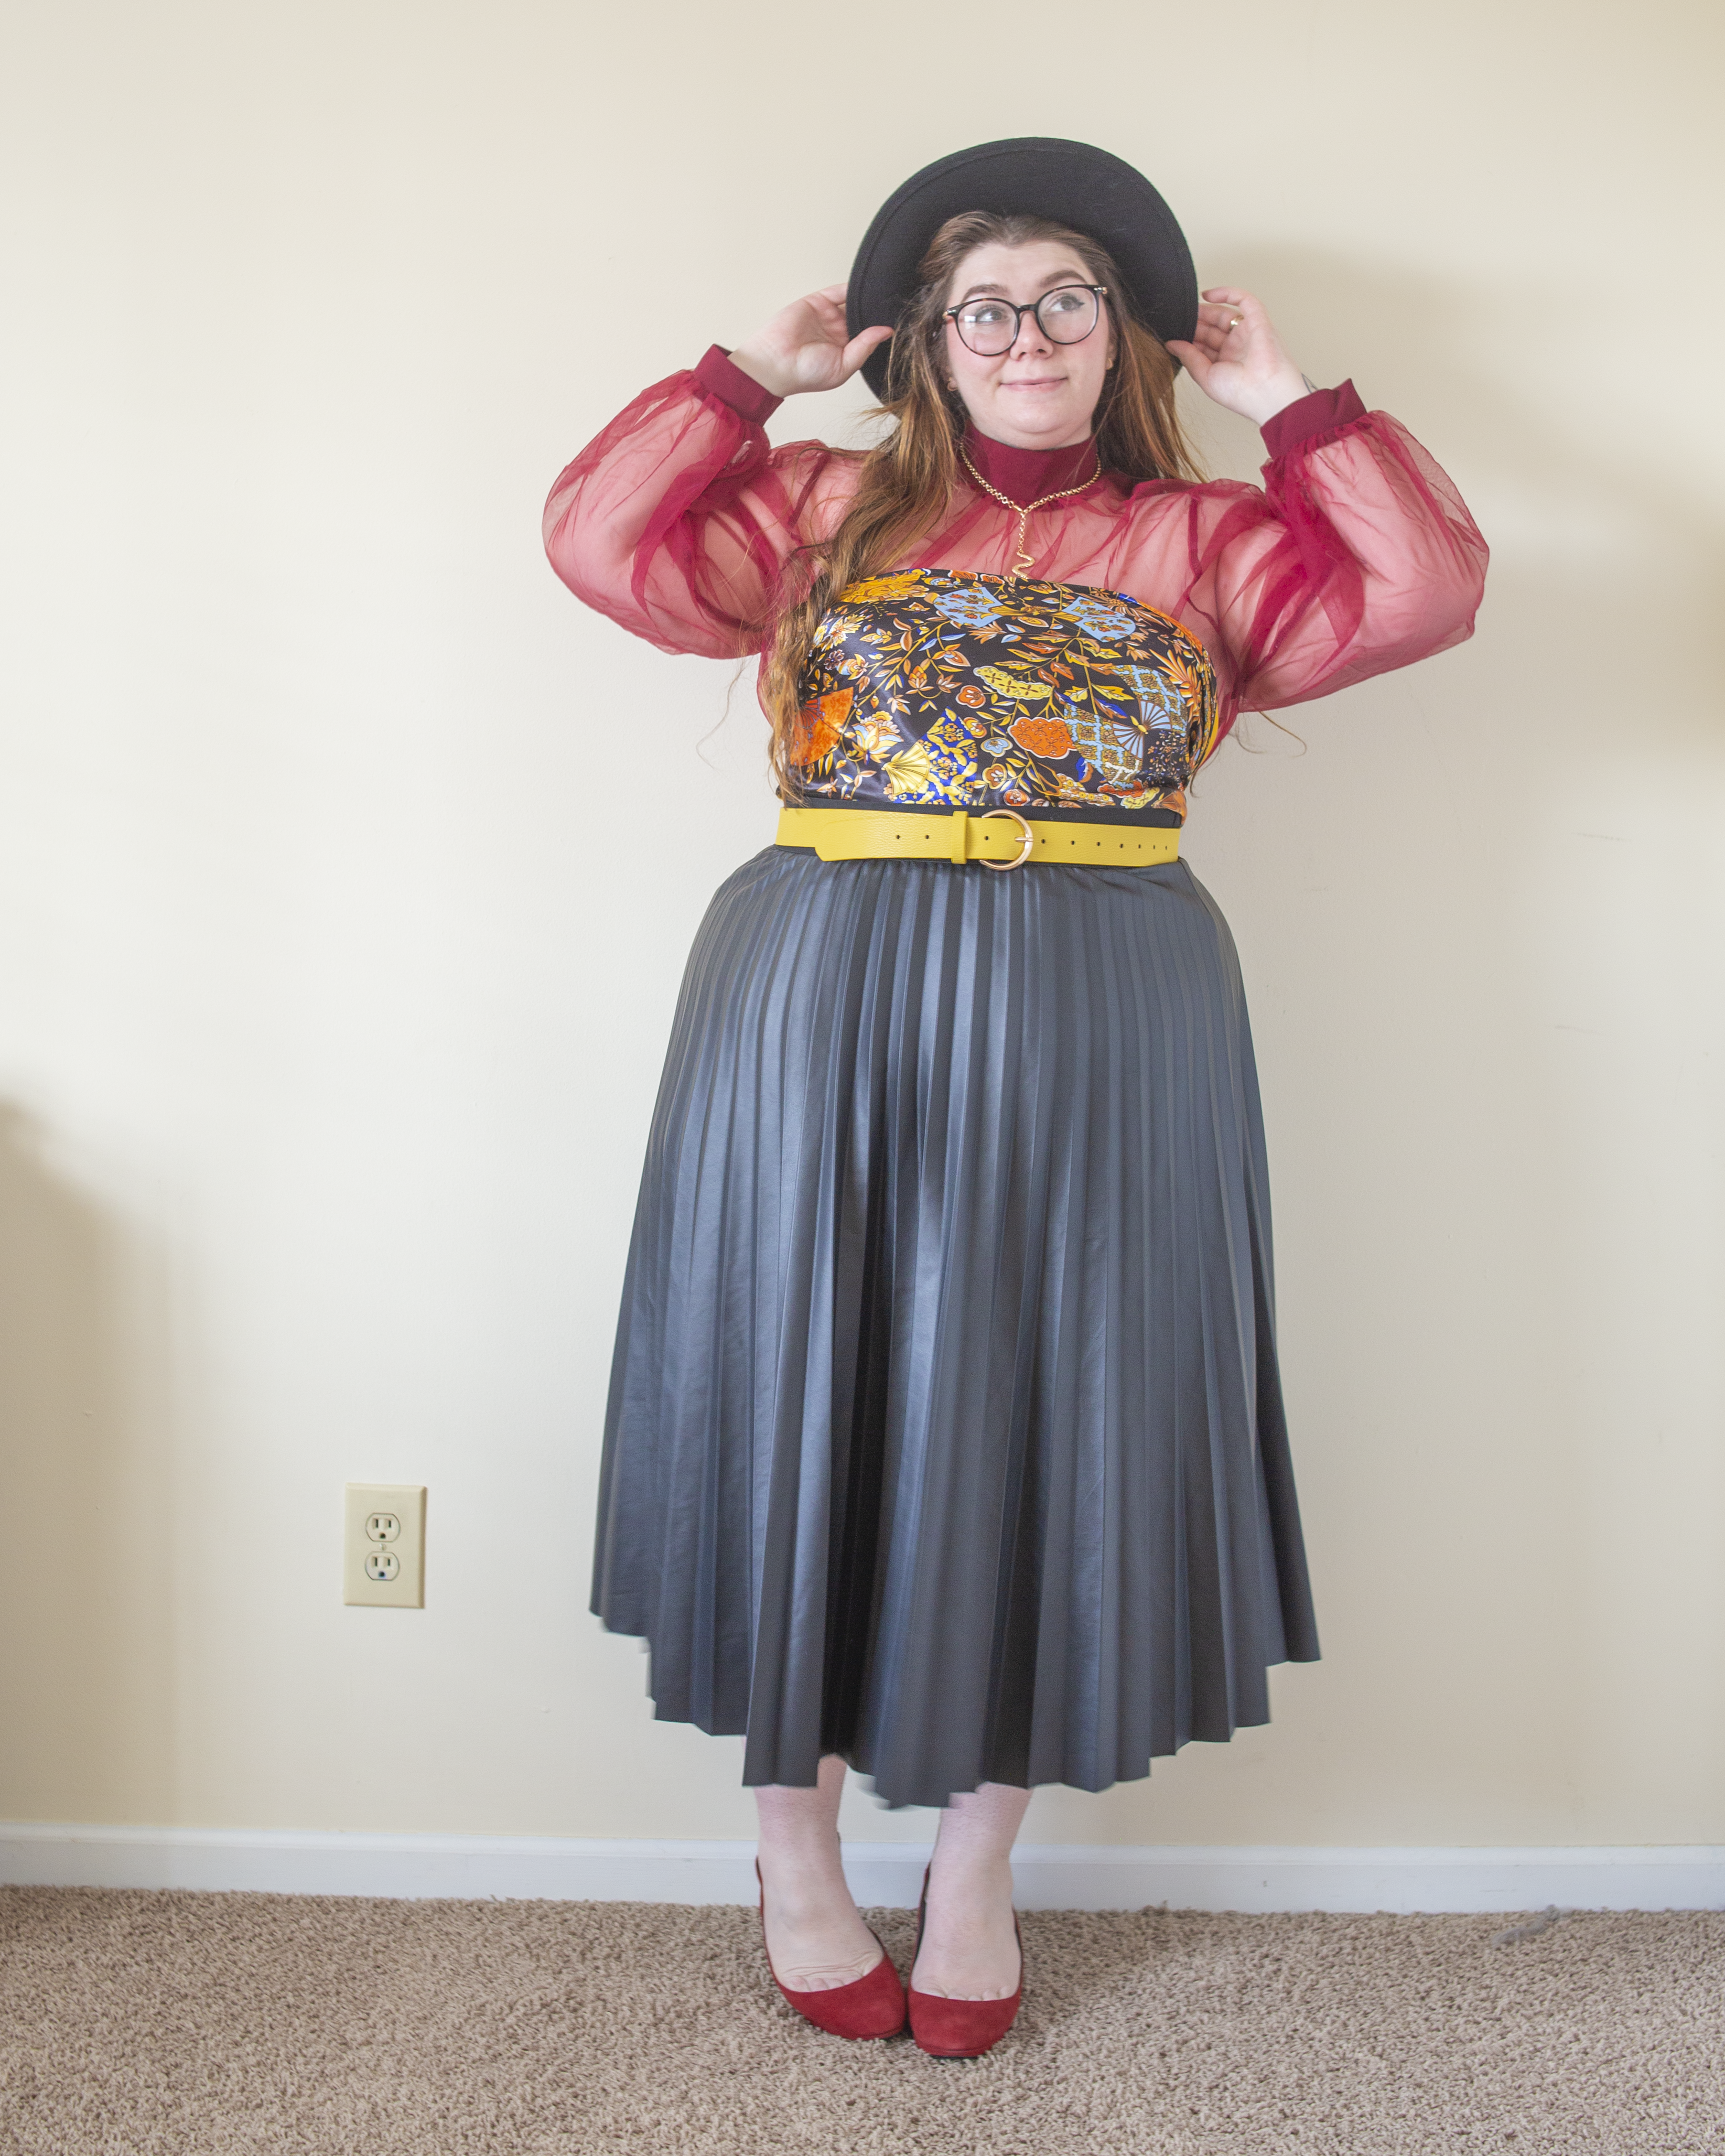 An outfit consisting of a sheer red blouse with lantern sleeves with a black satin scarf with a navy blue, light blue, gold and orange floral motif tied as a top layered over, a black leather pleated midi skirt and red round toe cling back heels.